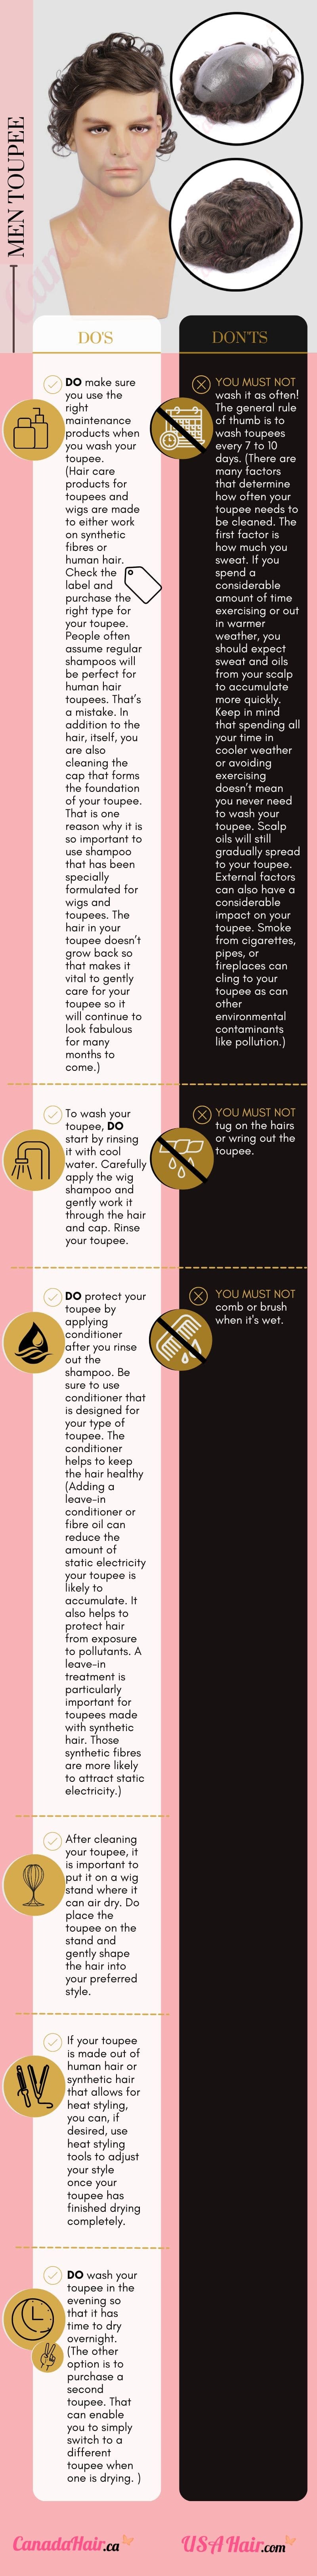 Do's and Dont's MEN TOUPEE \(800 × 6500 px\)-min.jpg